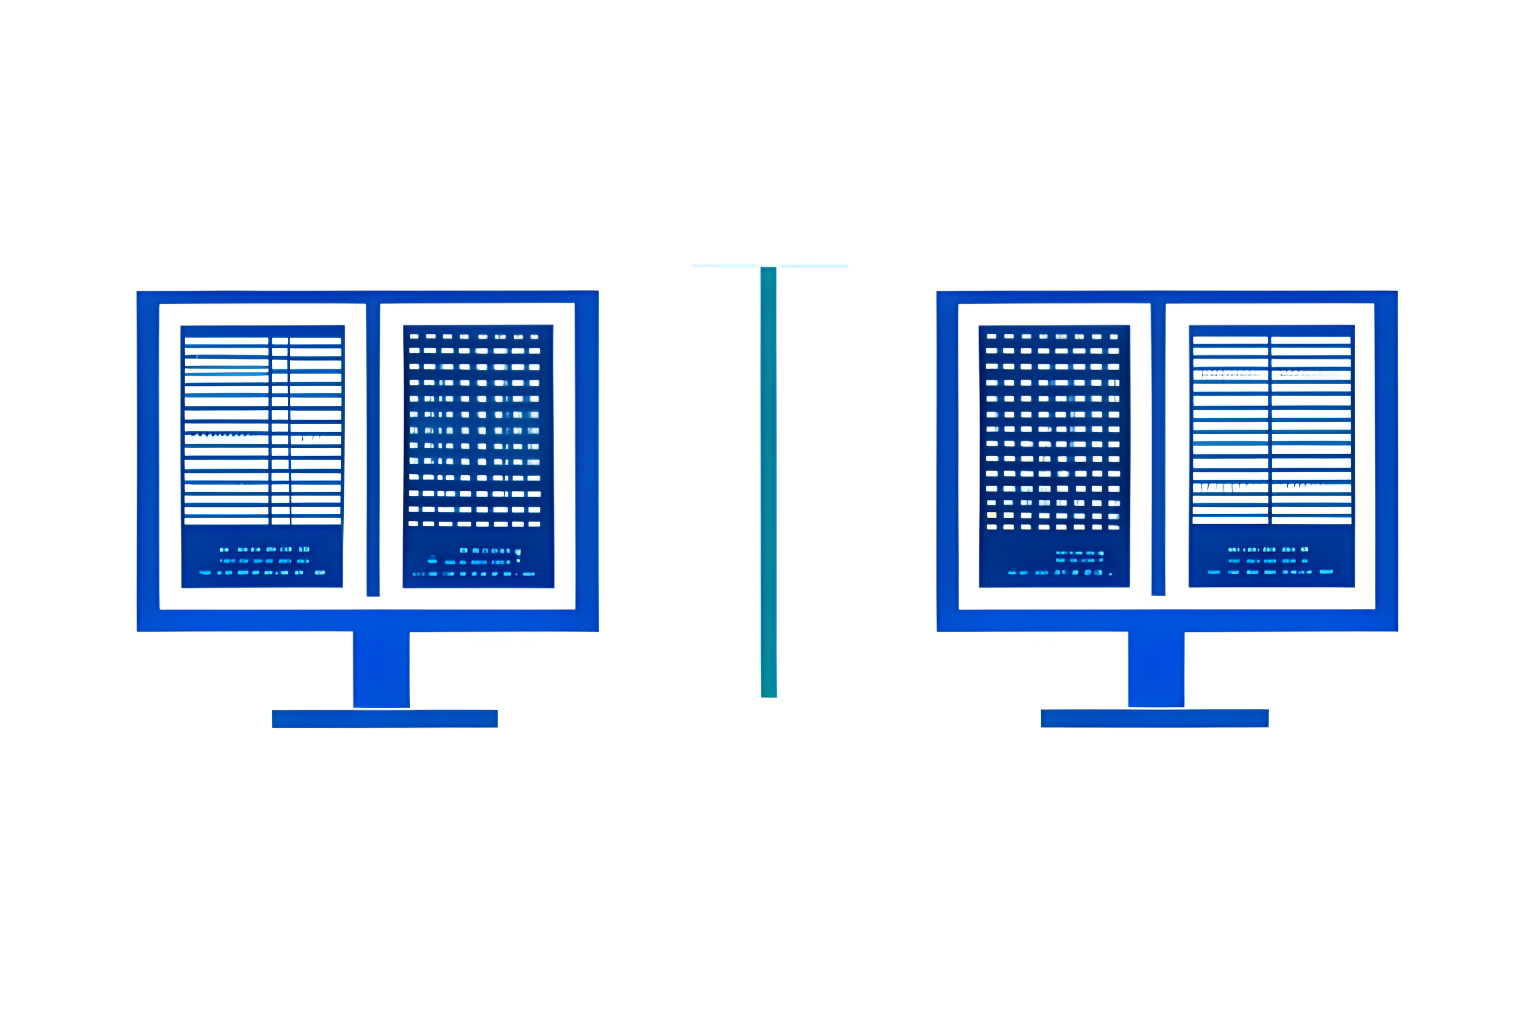 Generate an illustration of two computer systems side by side, with one system visually duplicating the information displayed on the screen of the other system. The duplication should be clear and detailed, highlighting the transfer of data or information between the two systems.